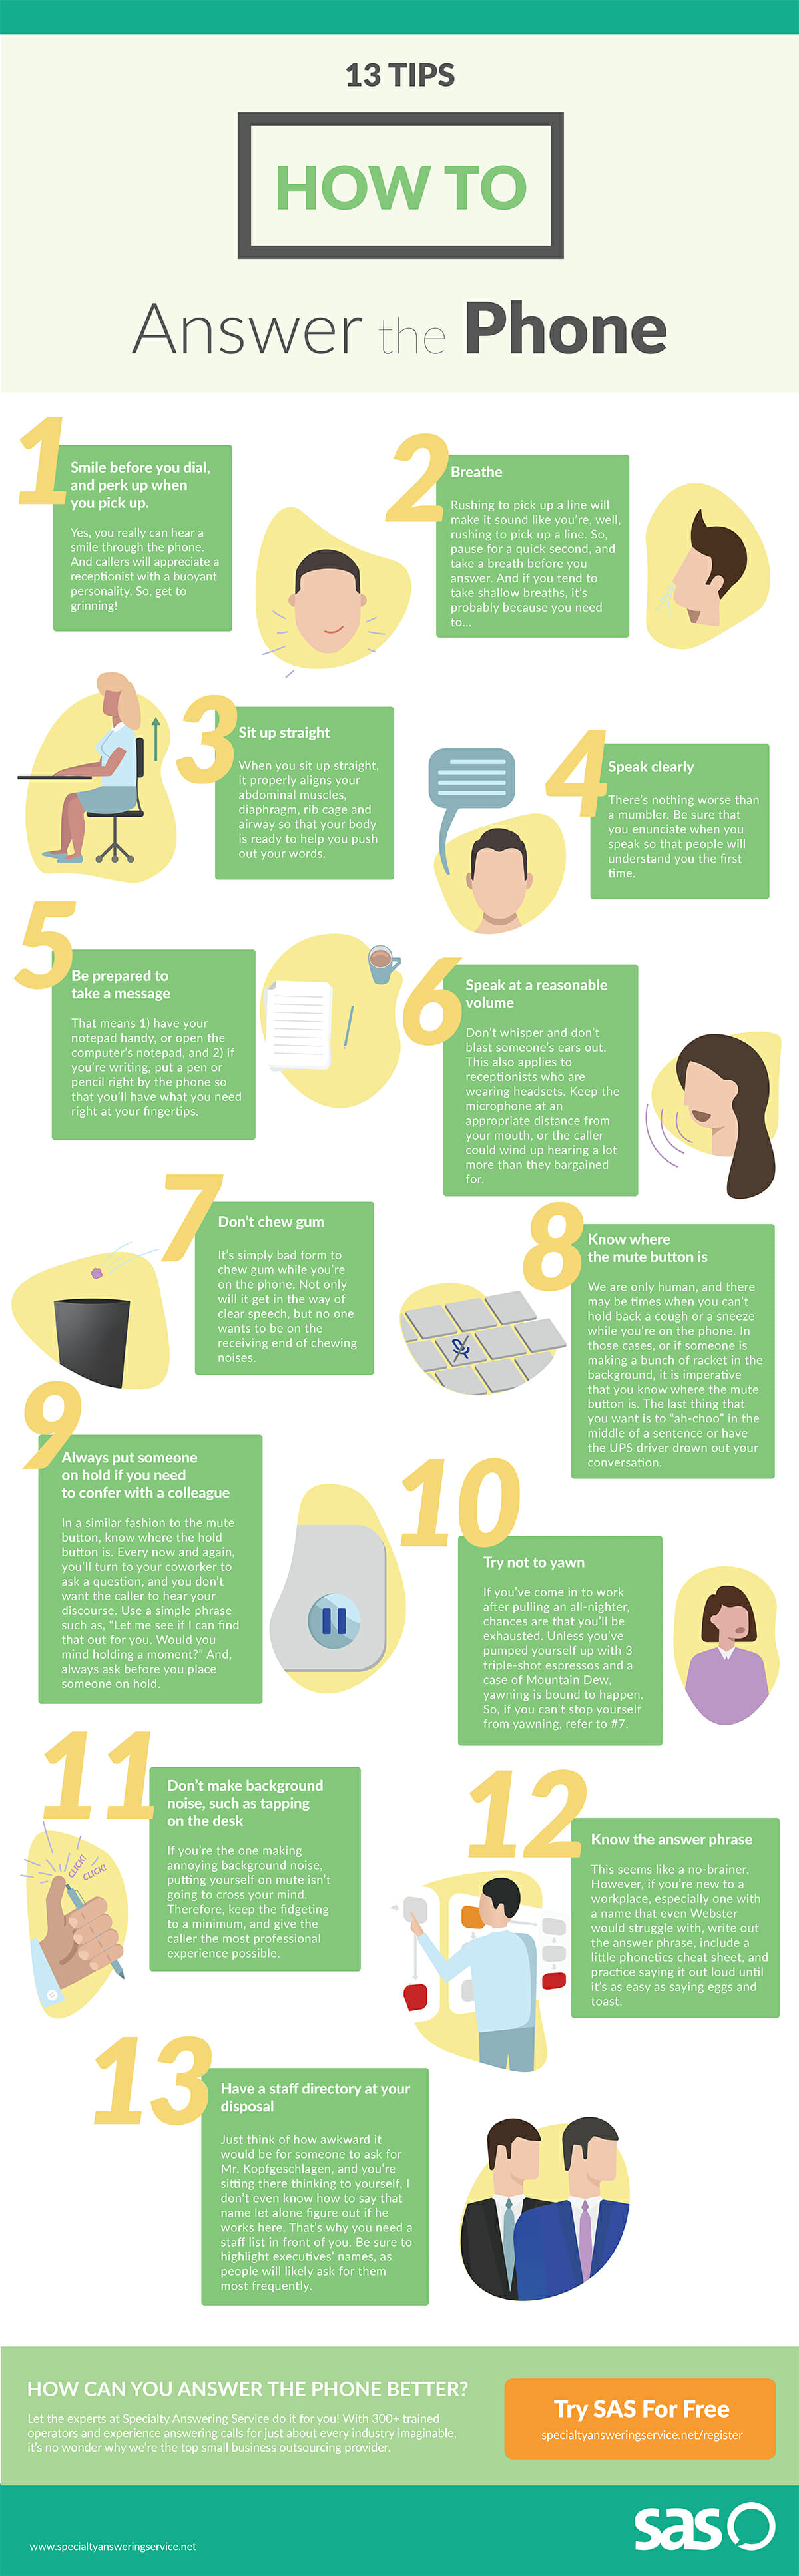 How To Professionally Answer Your Business Phone Infographic